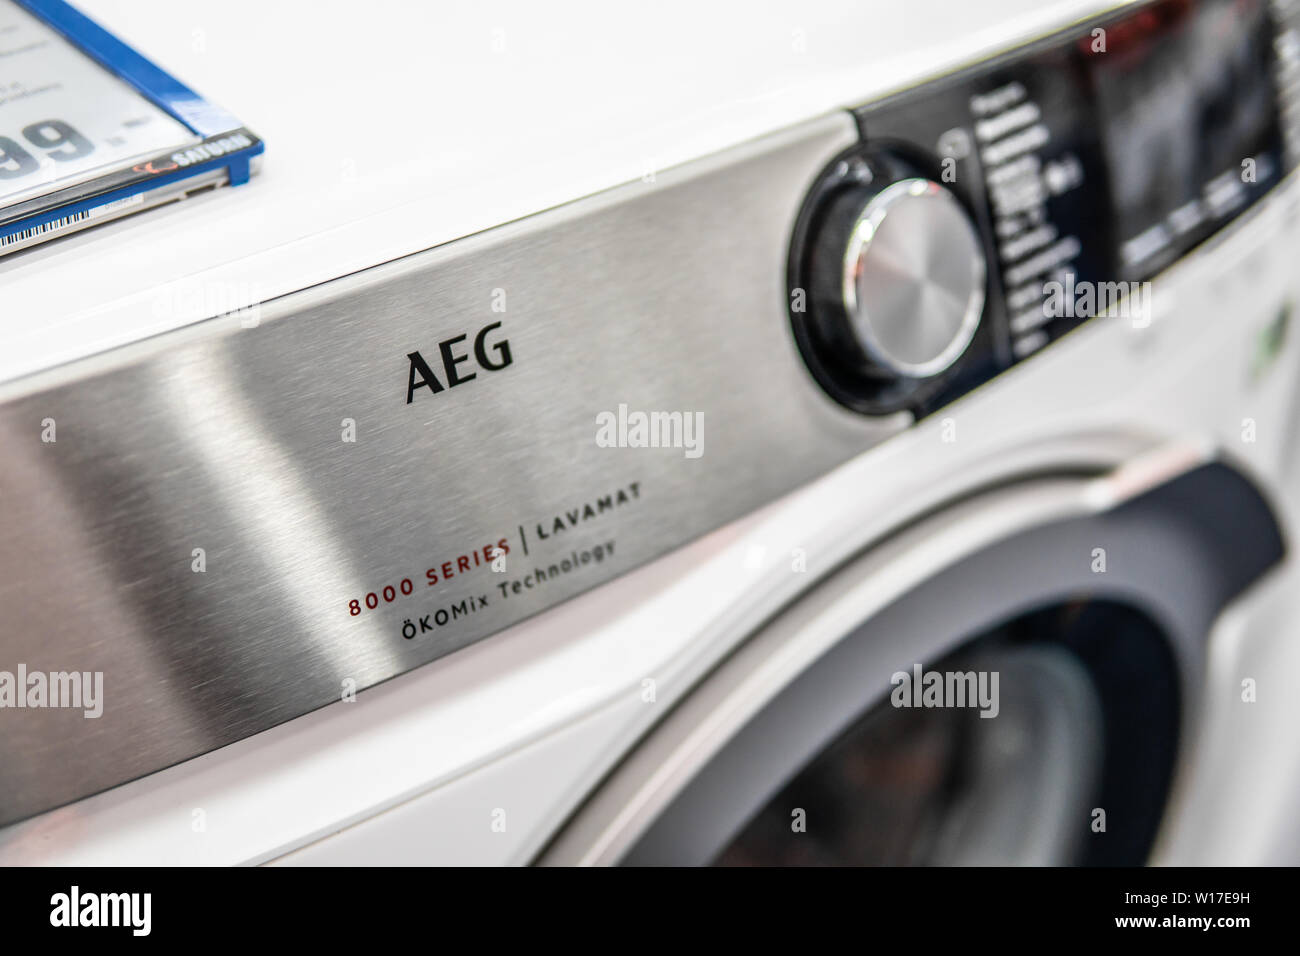 Aeg Washing Machine High Resolution Stock Photography and Images - Alamy